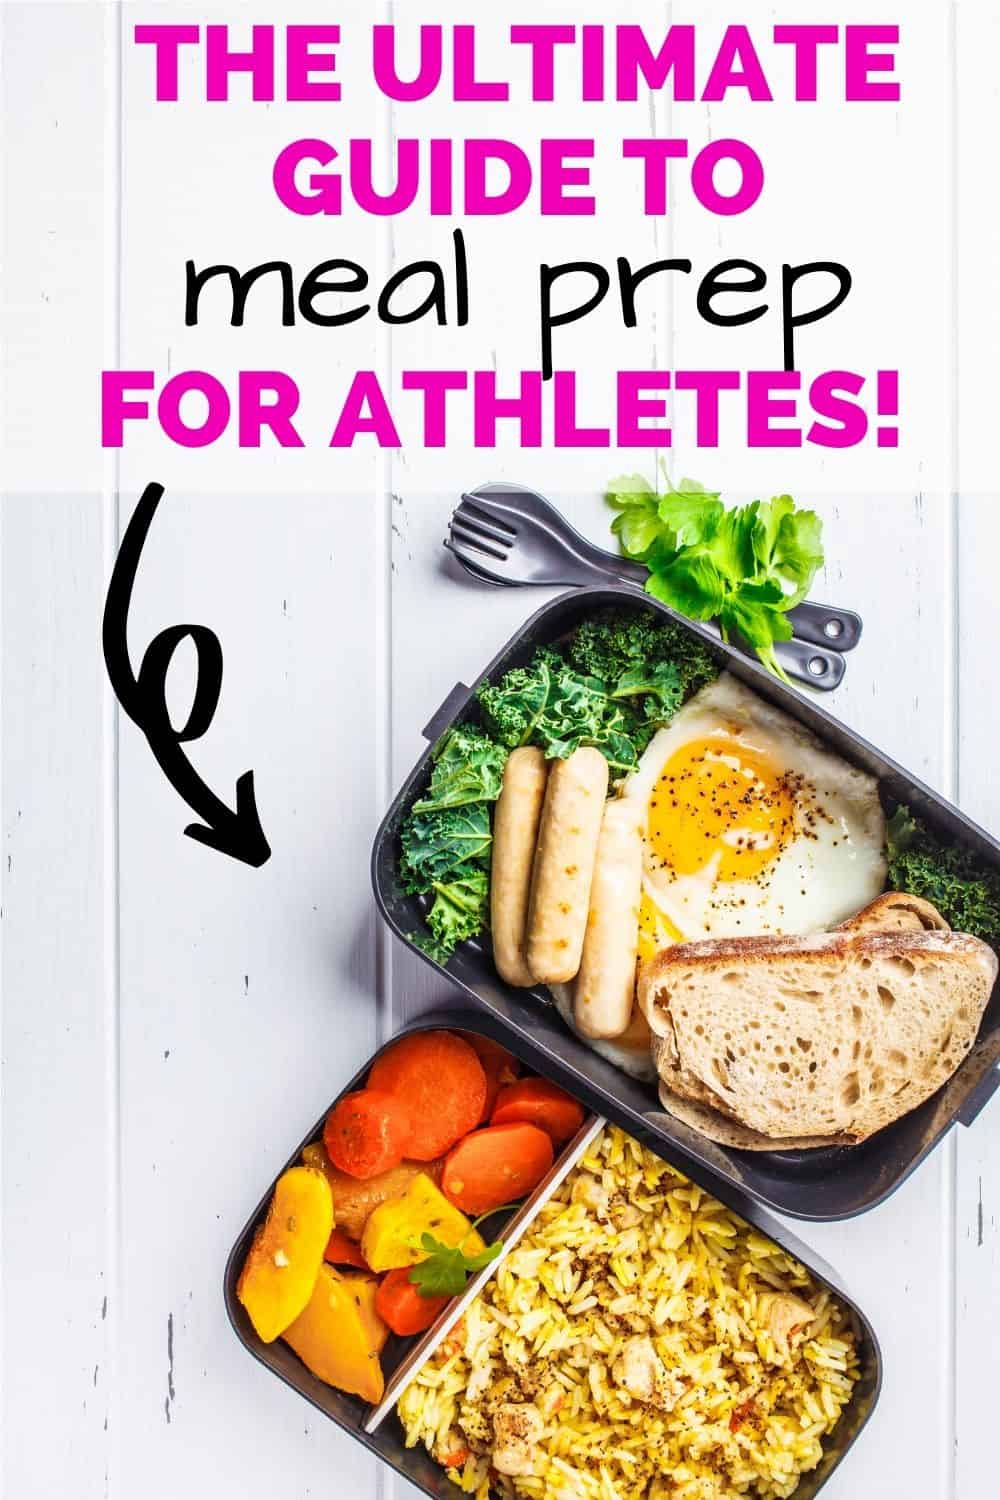 Healthy meal ideas for athletes